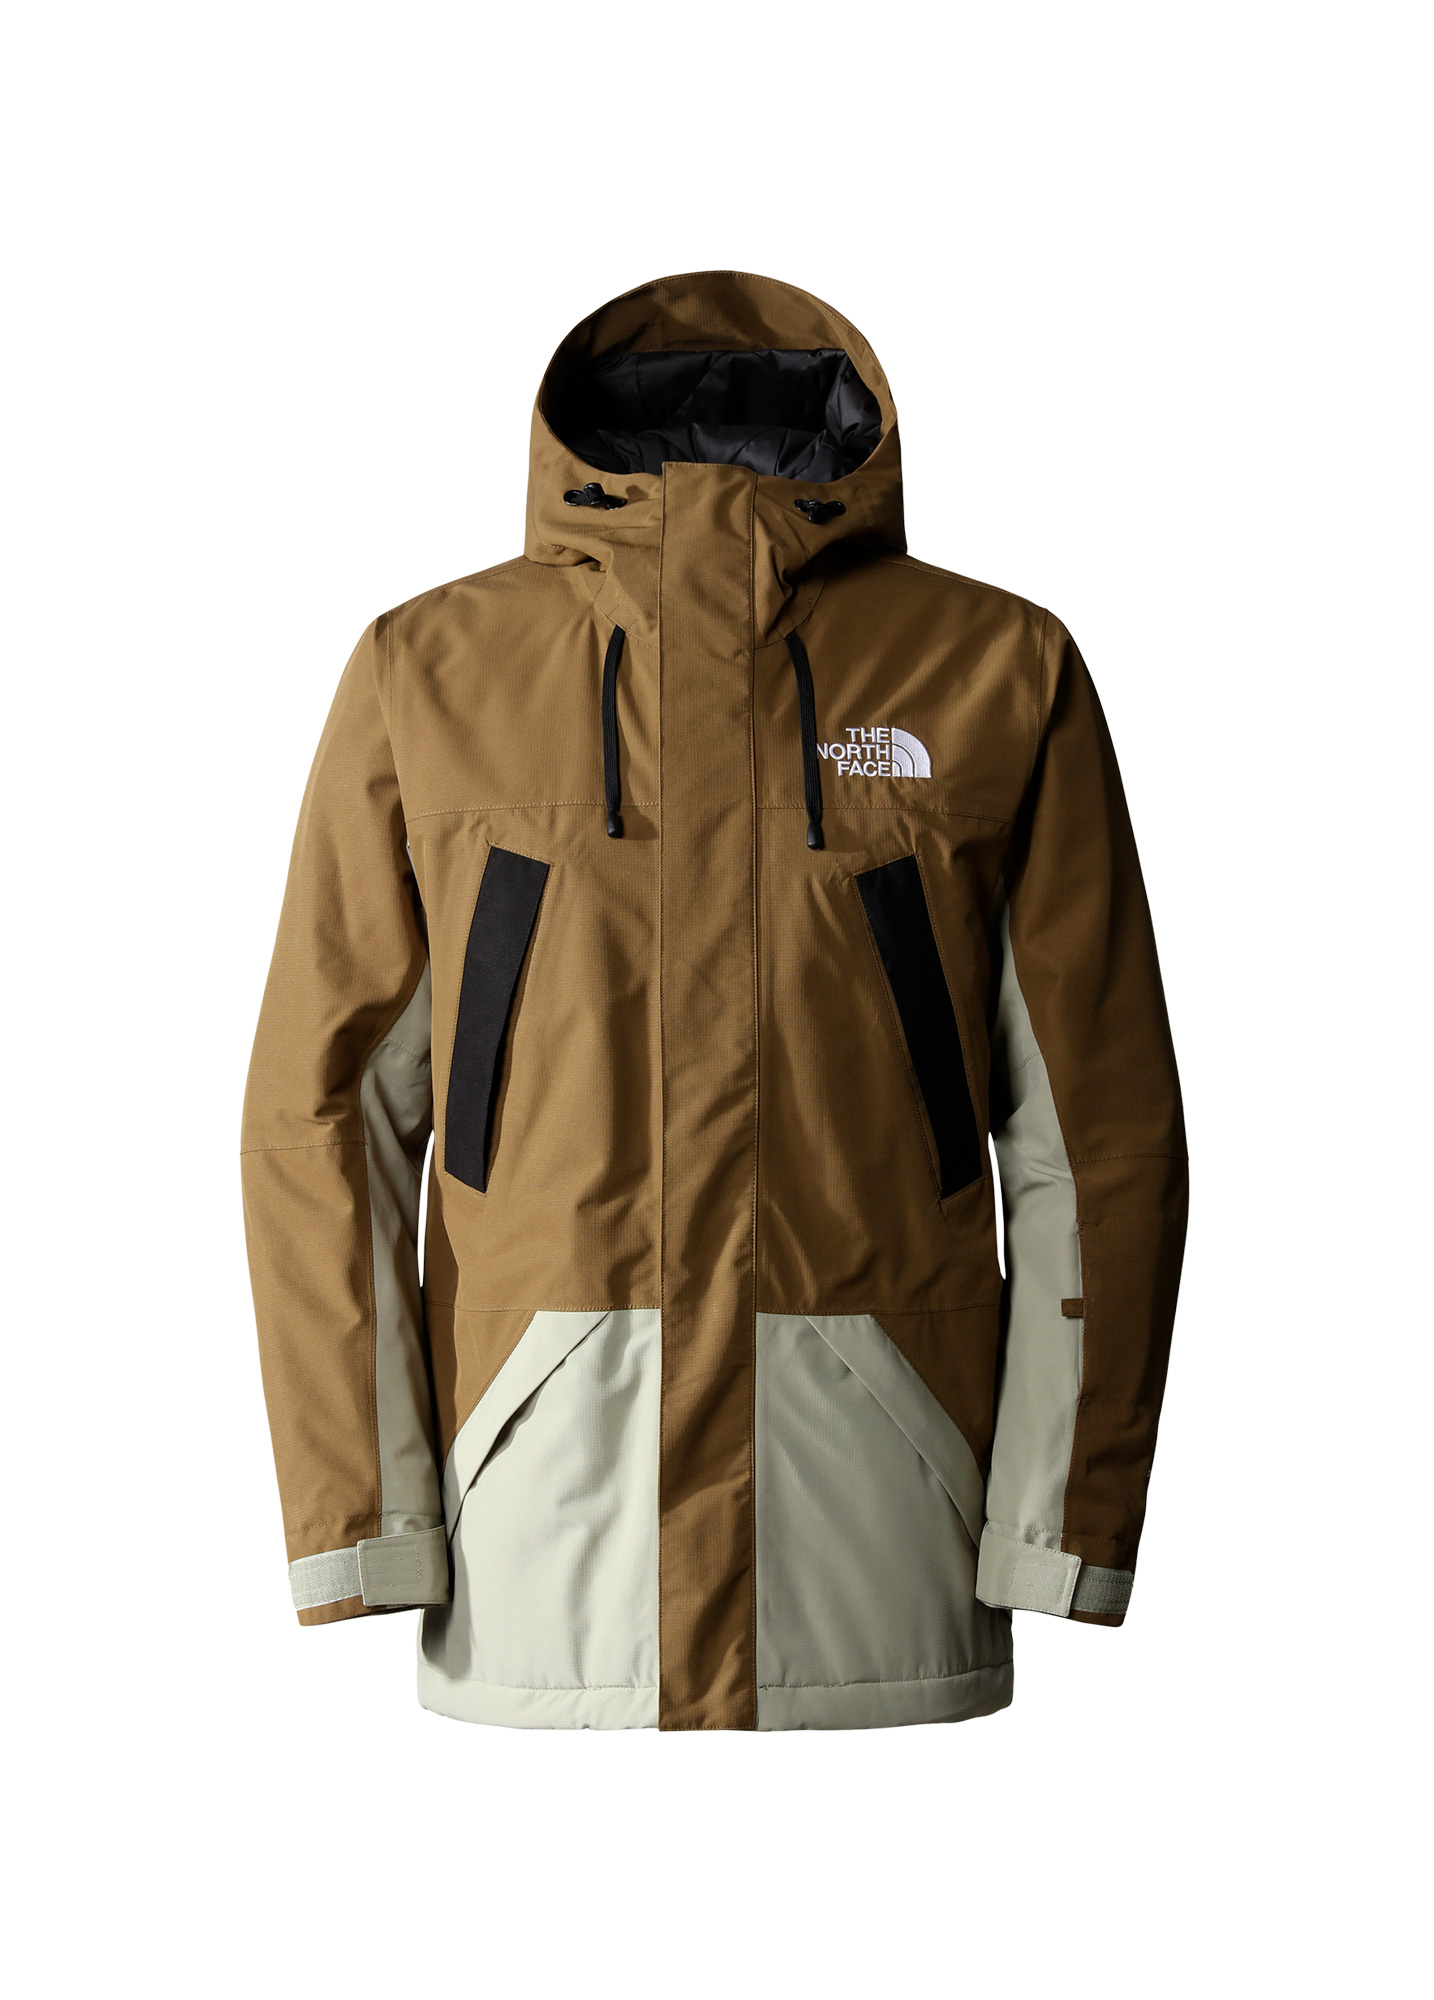 North face men's winter jacket is a renowned brand known for producing high-quality and durable winter jackets for men.